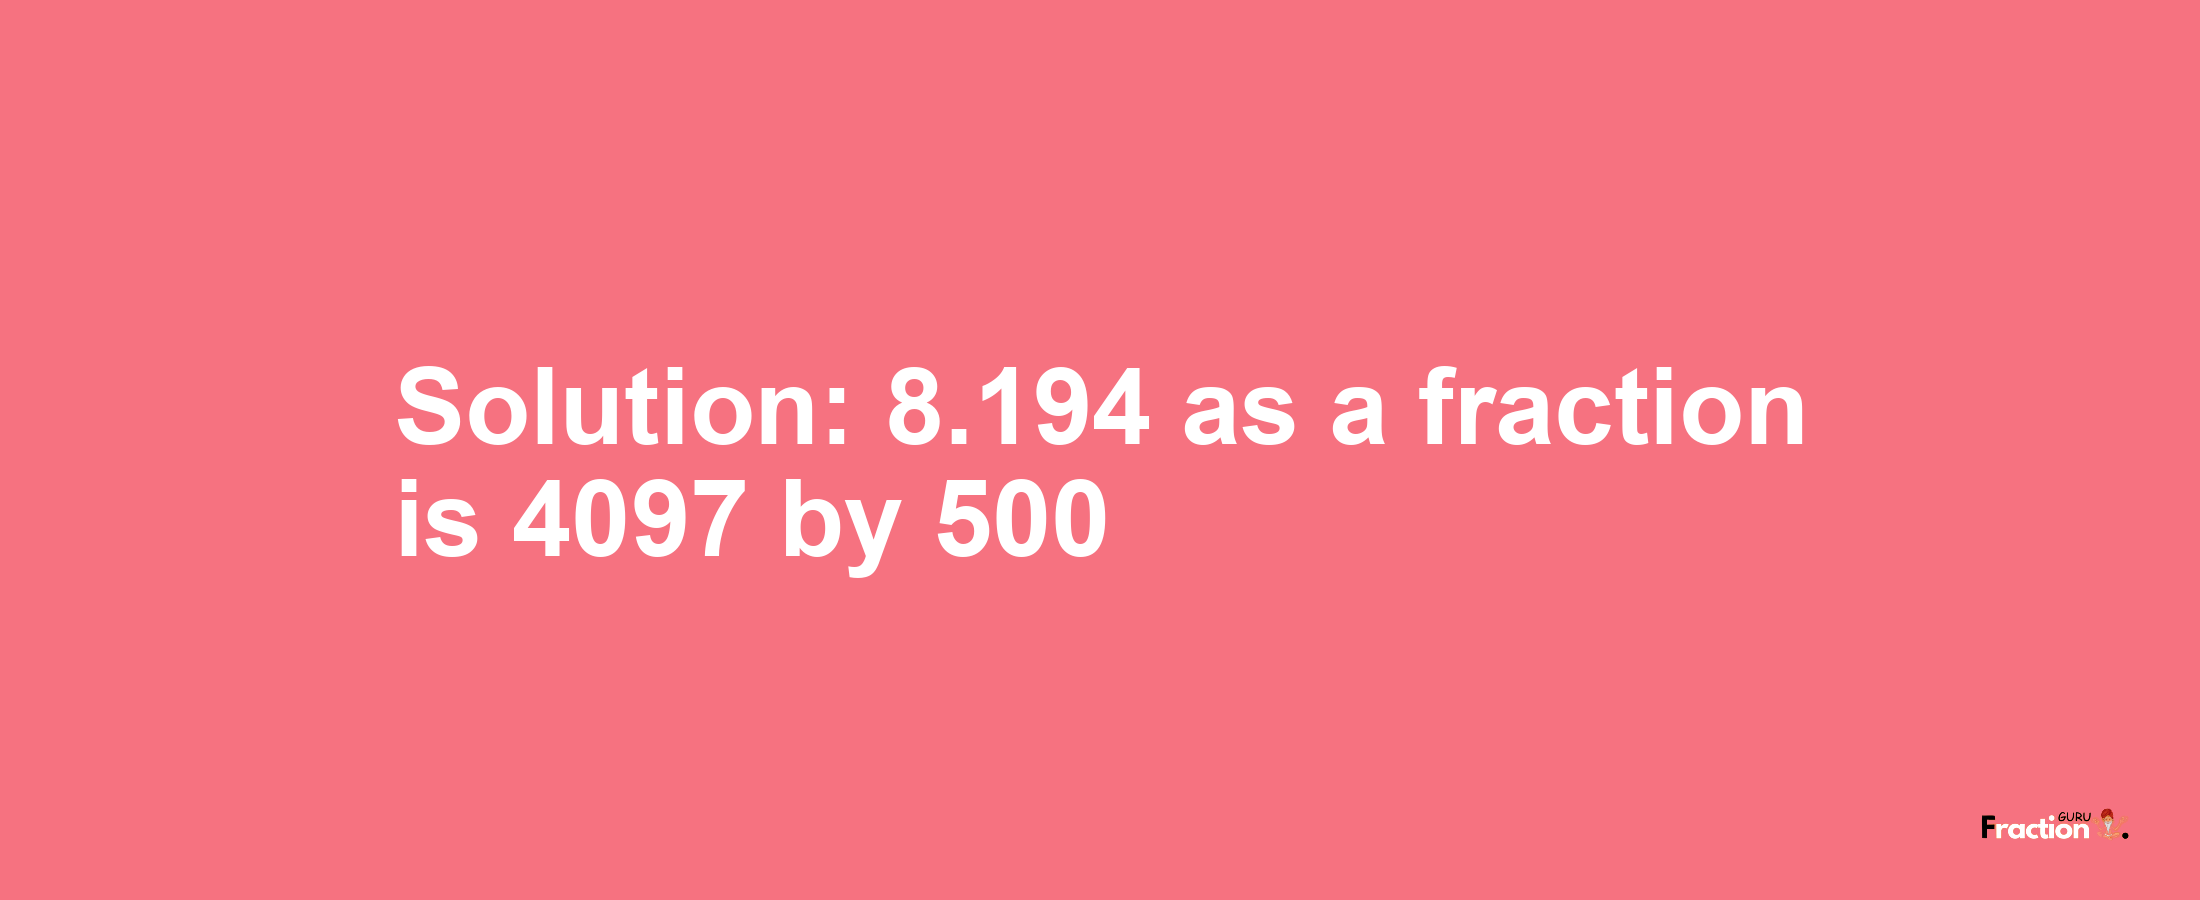 Solution:8.194 as a fraction is 4097/500